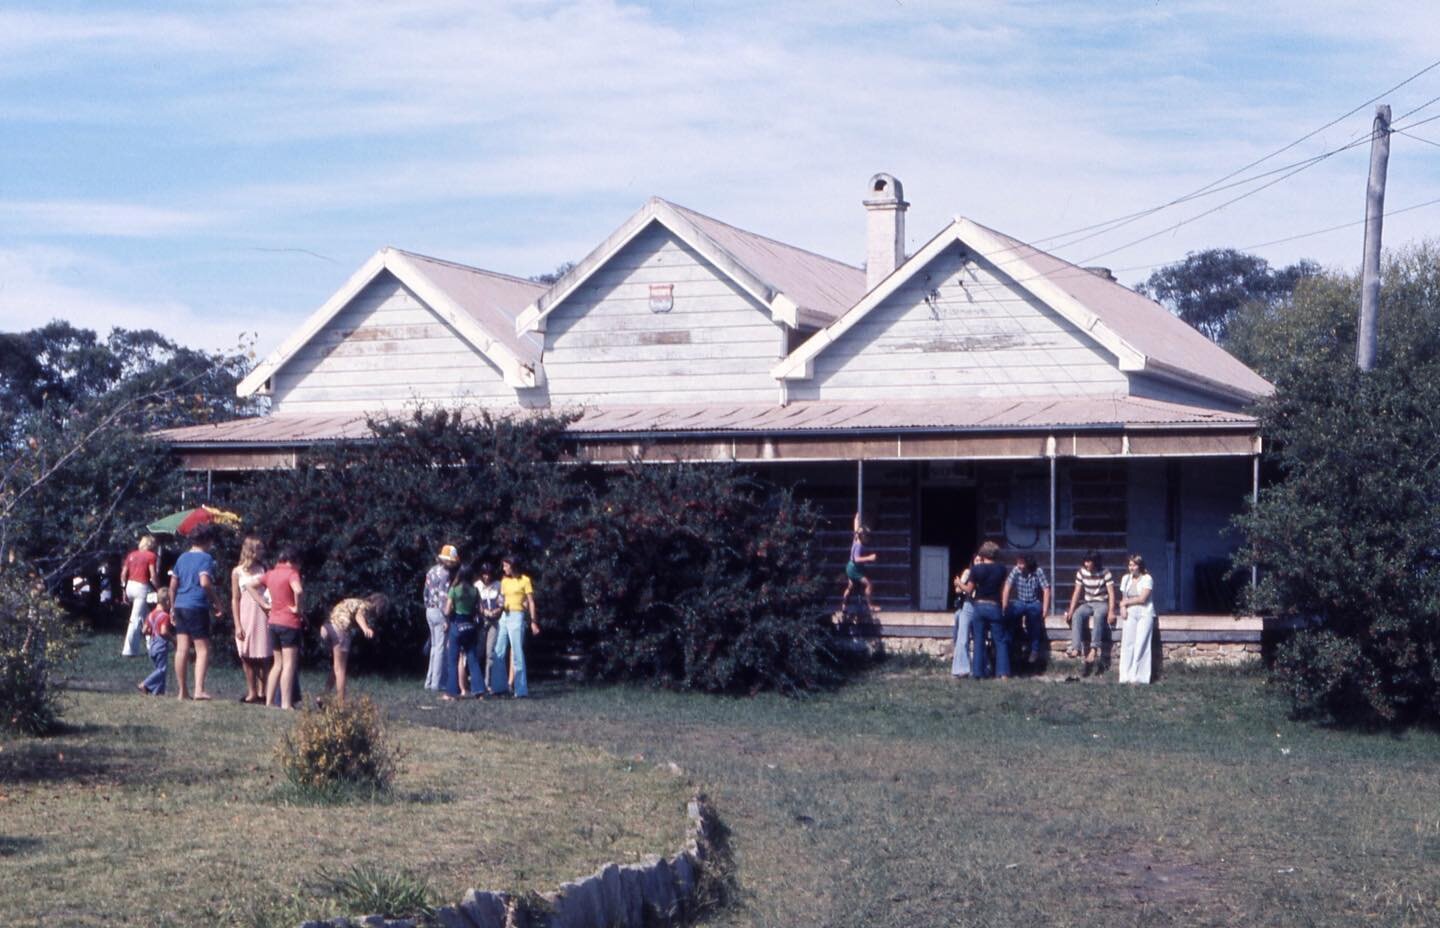 Throwback Thursday! Camp from the 1970s 🎞

1st photo: Front of the Homestead
2nd photo: Concrete slab of the multi-purpose hall
3rd photo: Gathering of teens outside the hall
4th photo: Toilet block
5th photo: Back of the Homestead

#throwback #camp